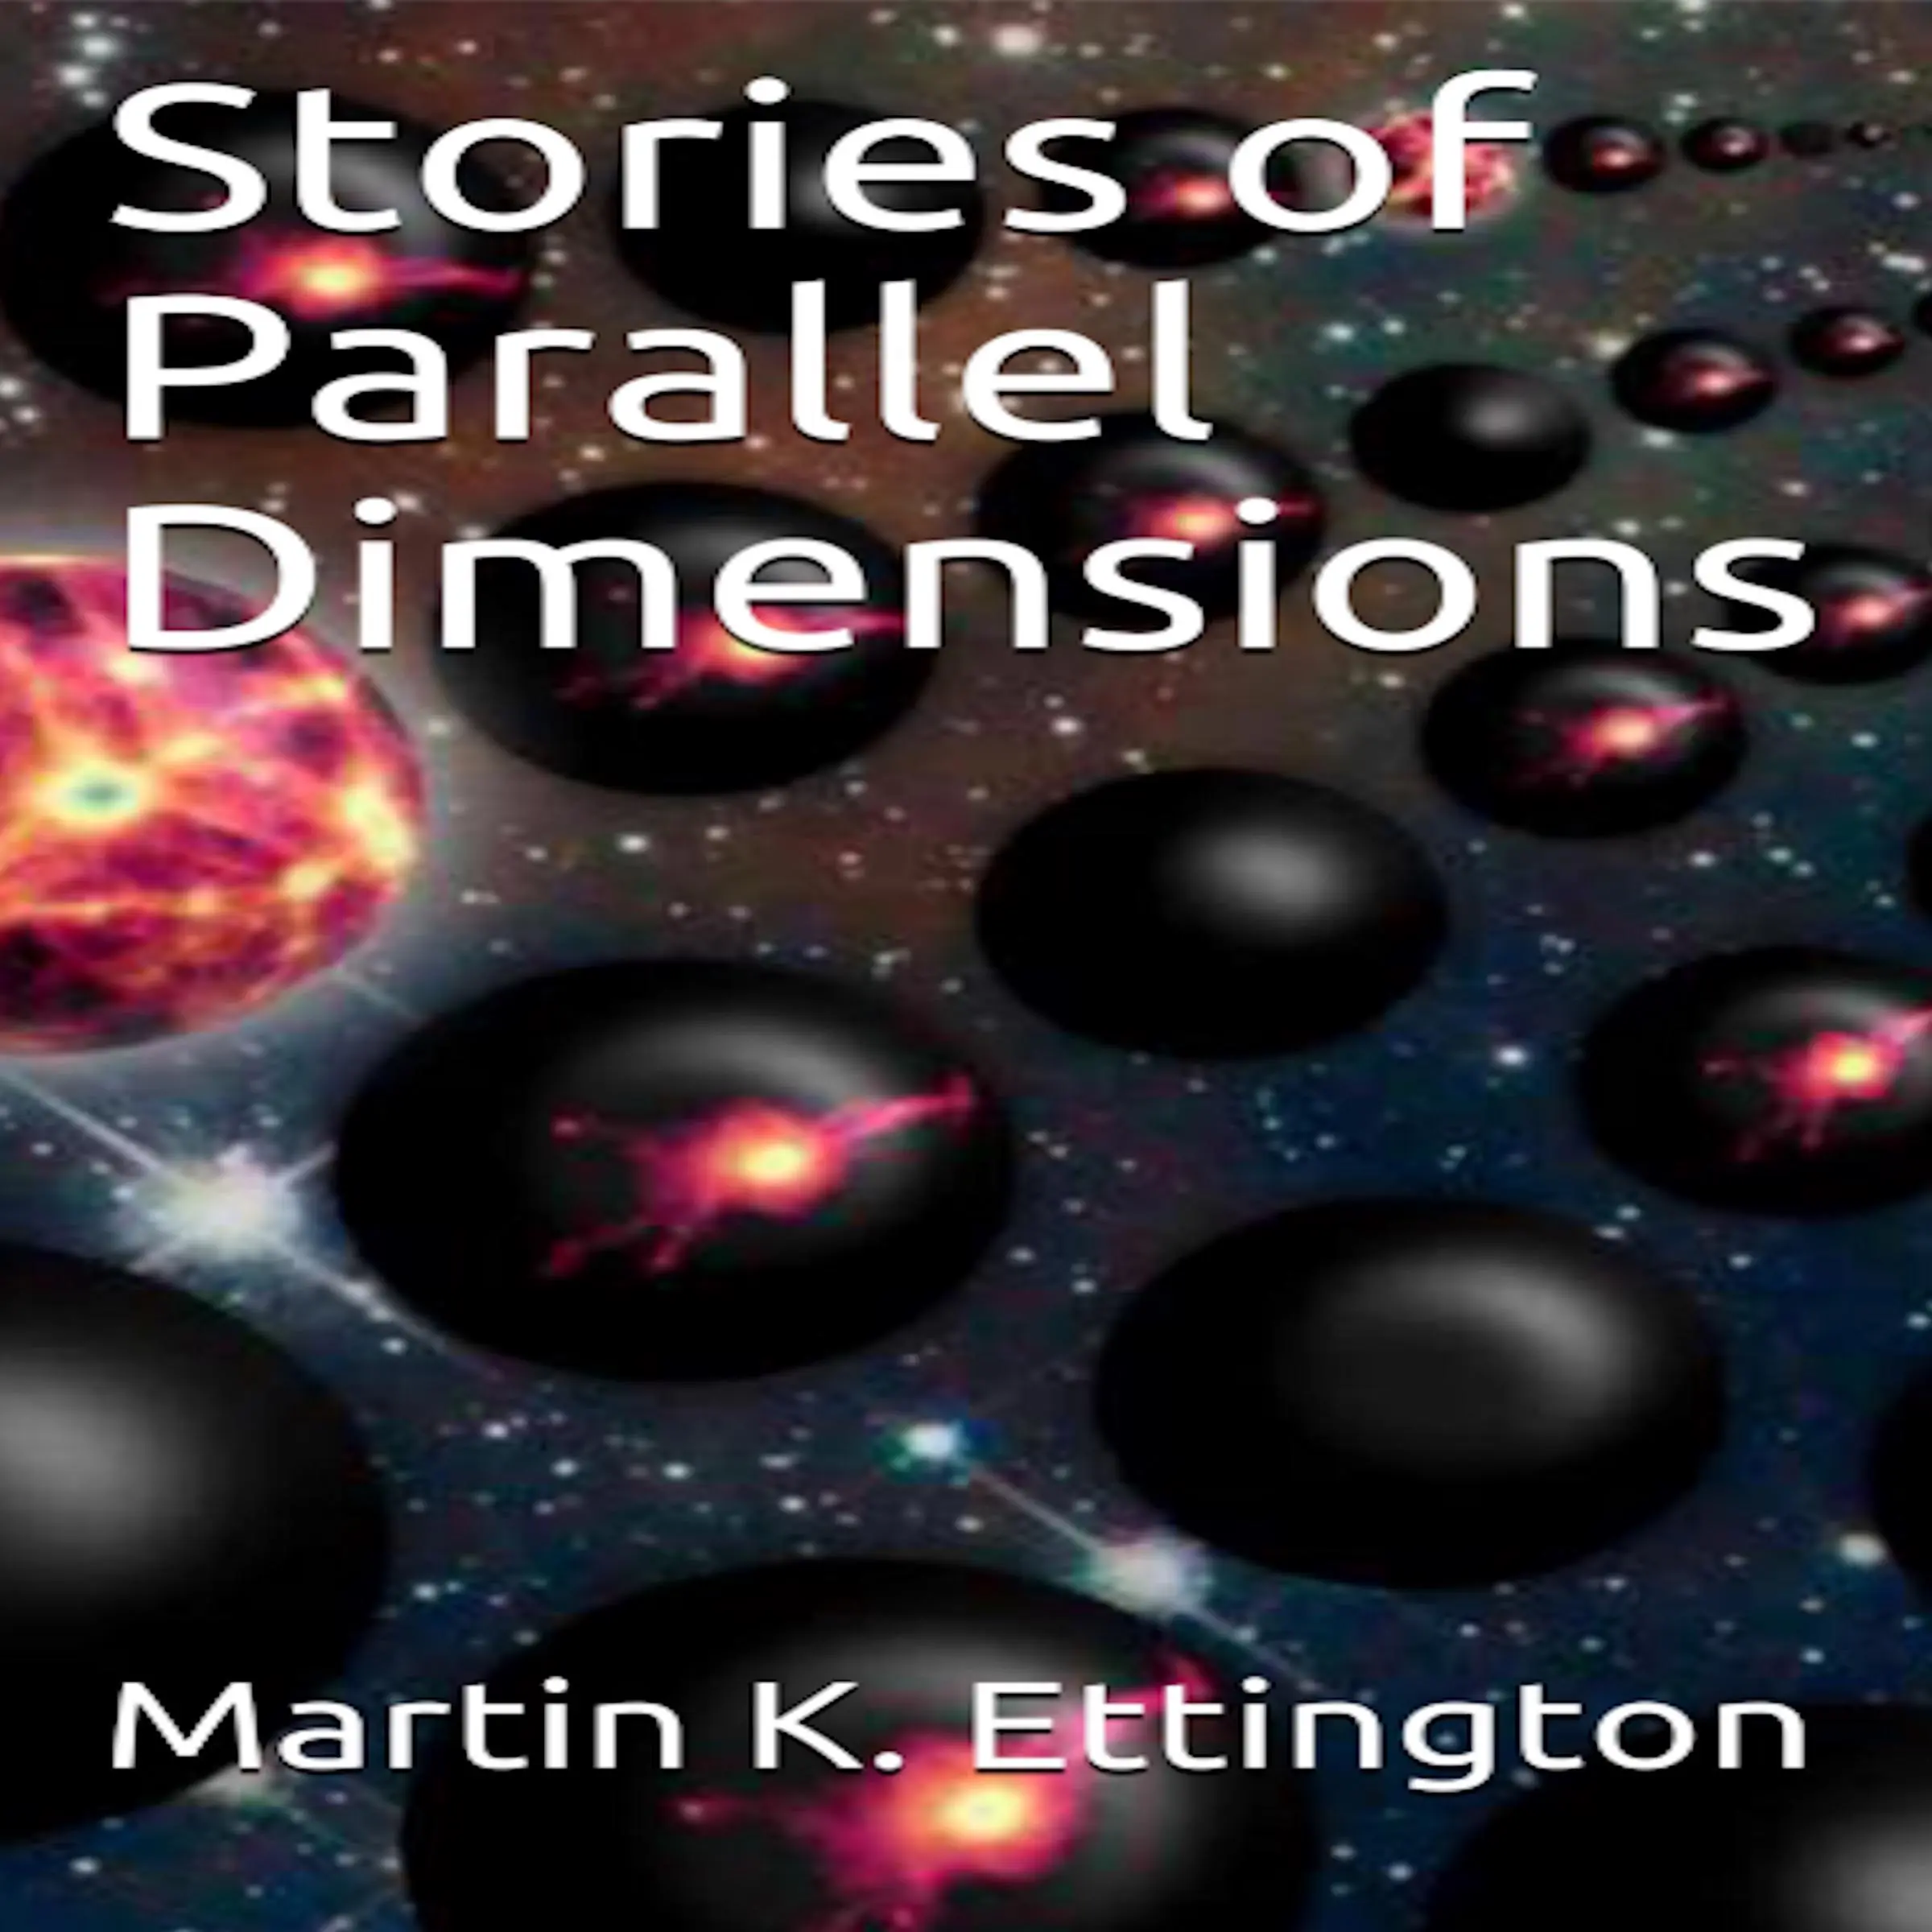 Stories of Parallel Dimensions Audiobook by Martin K. Ettington